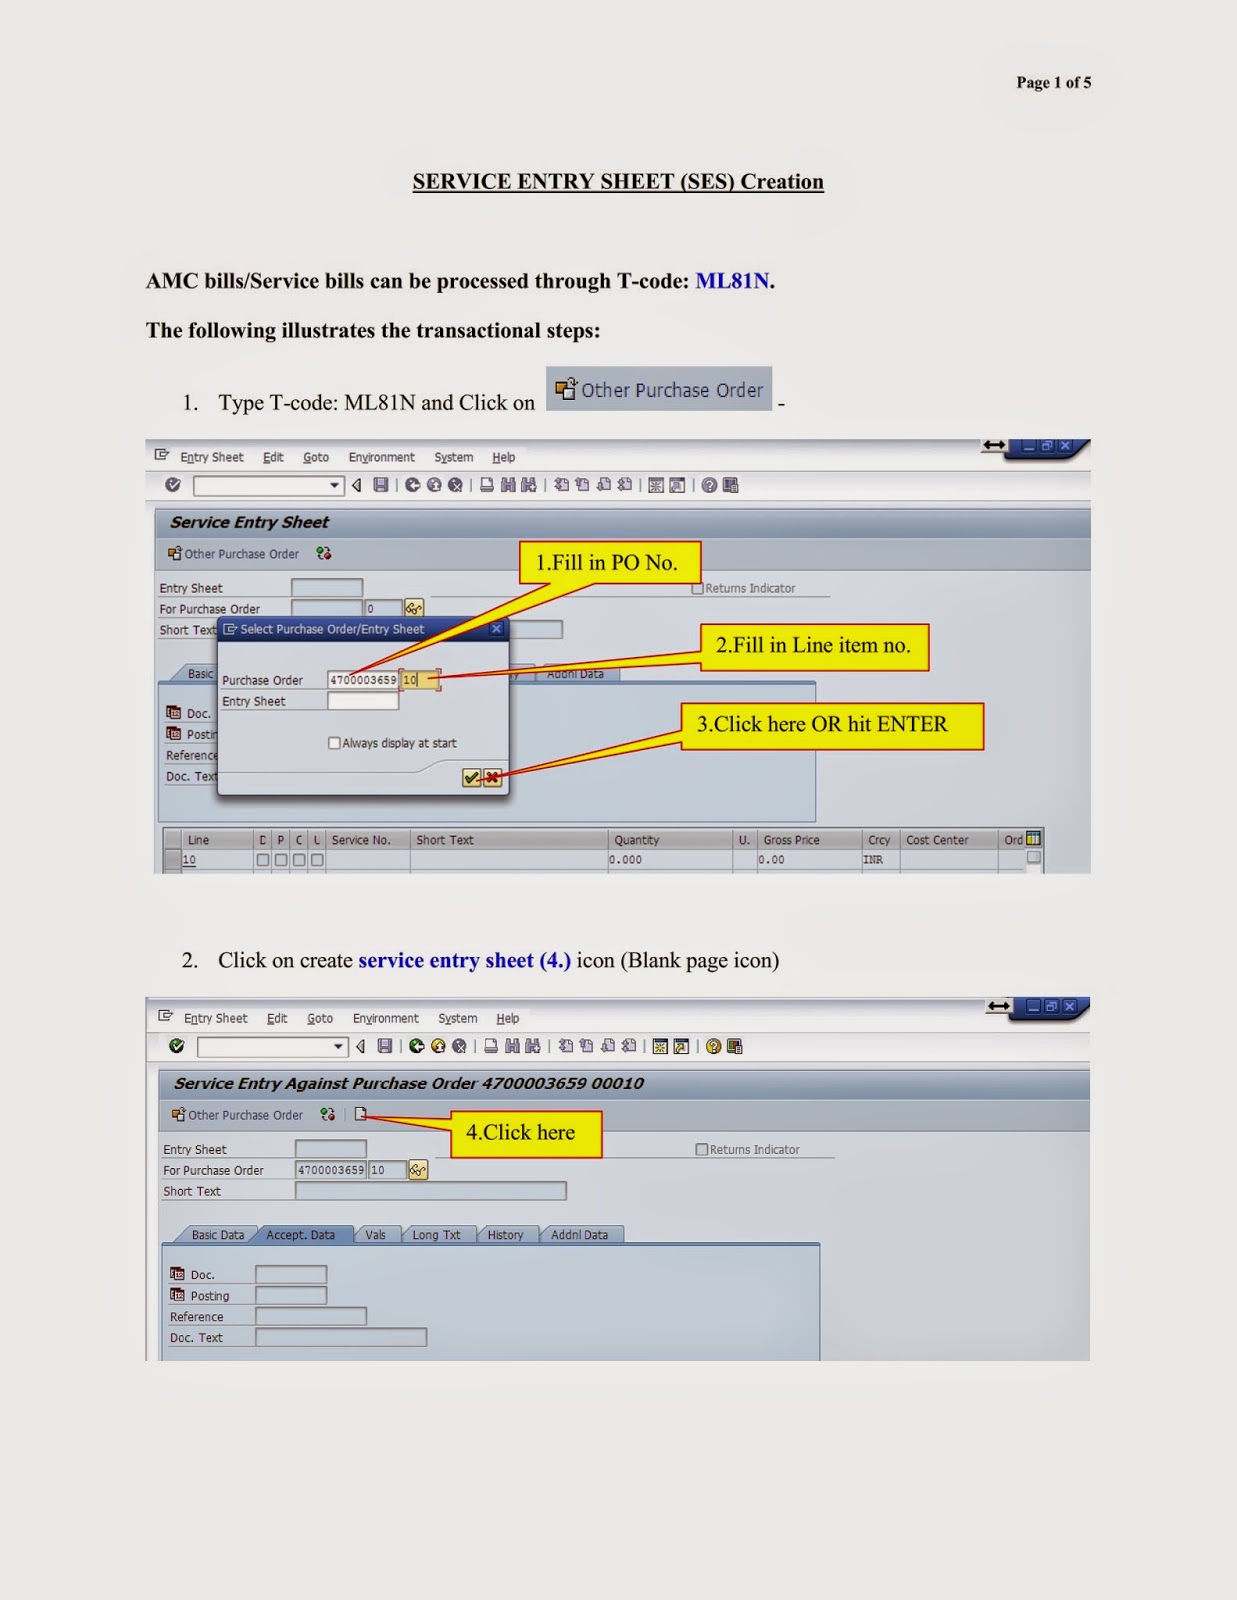 SAP PM, MM module tips for BSNL ERP End users: End user manual for